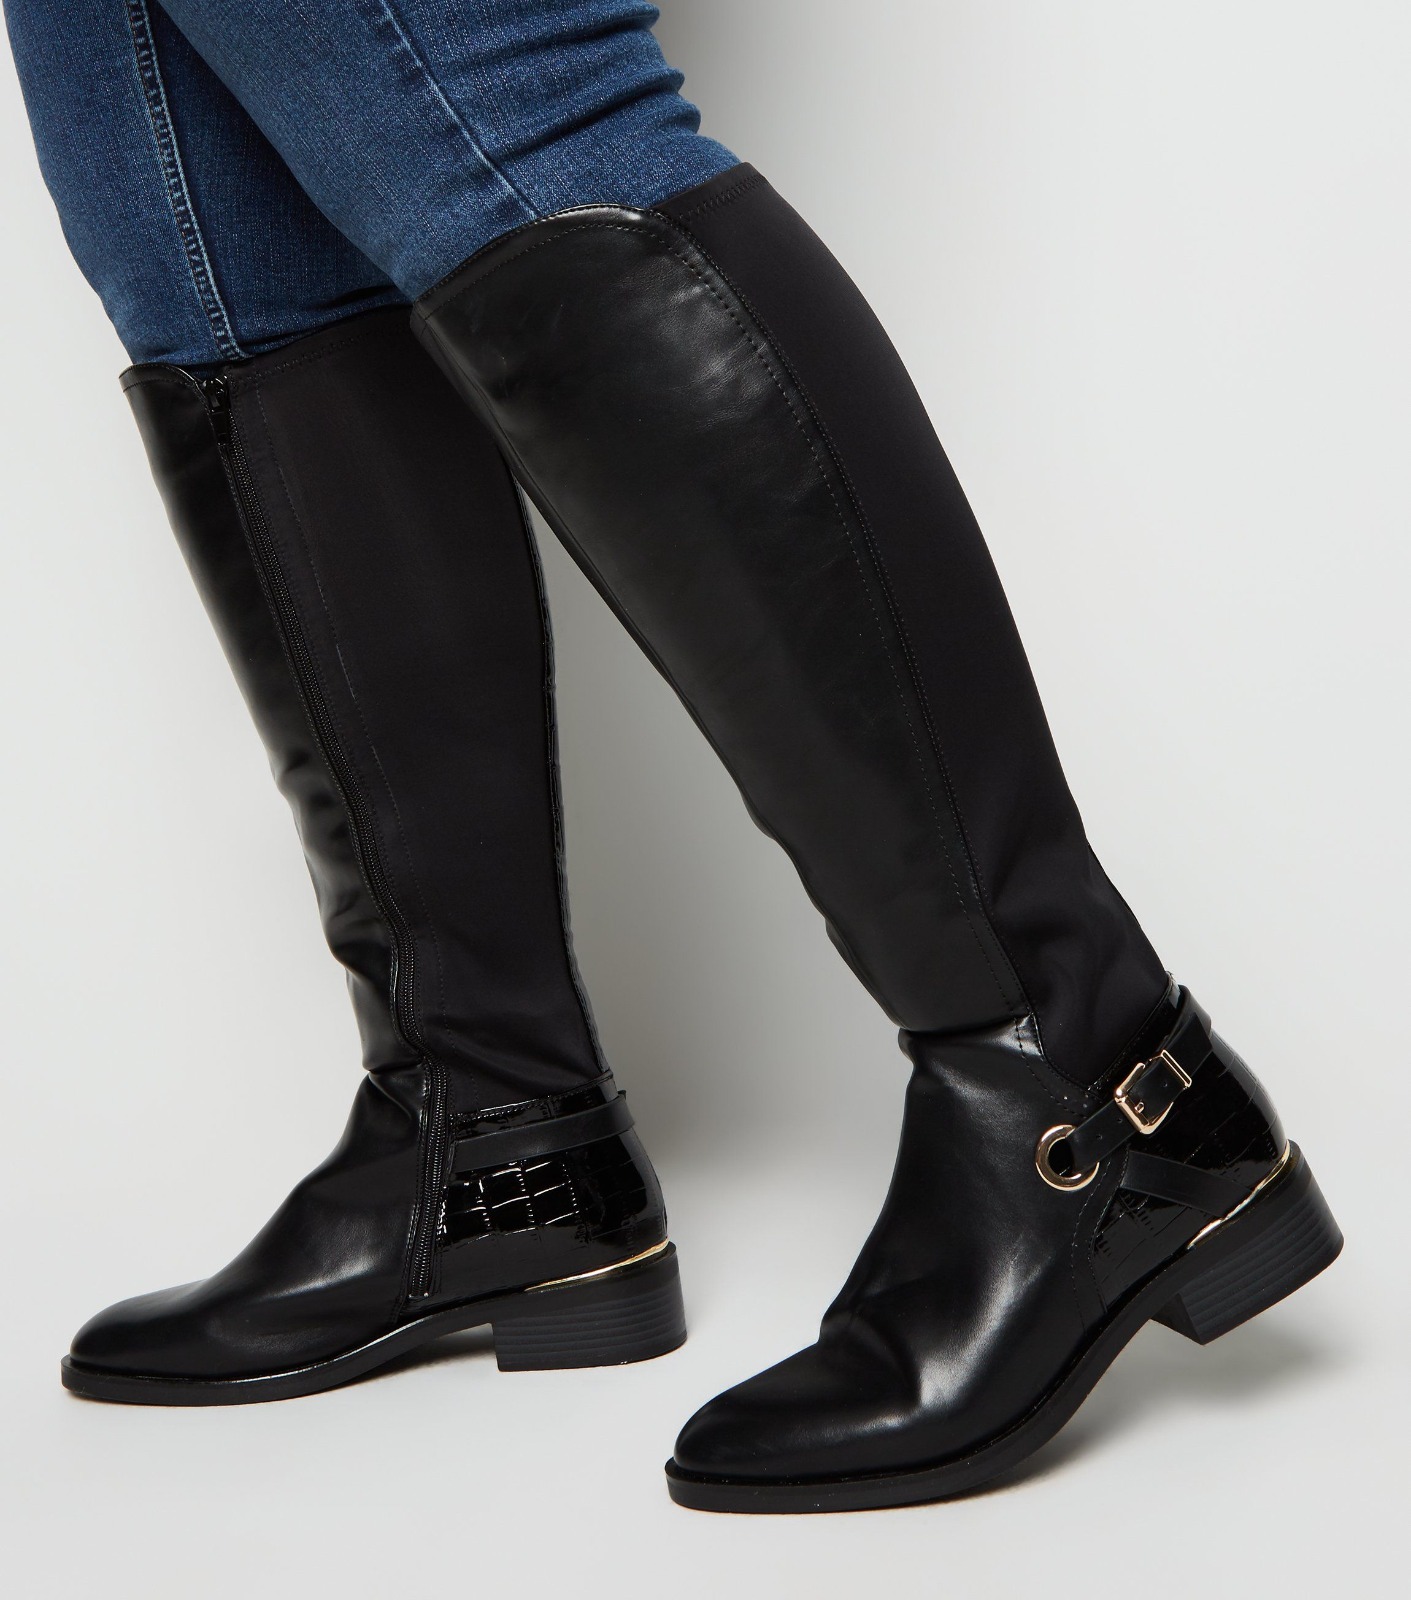 New Look Ladies Womens Black Flat Knee High Boots Calf Wide Fit Size 4 5 6 7 8 Ebay